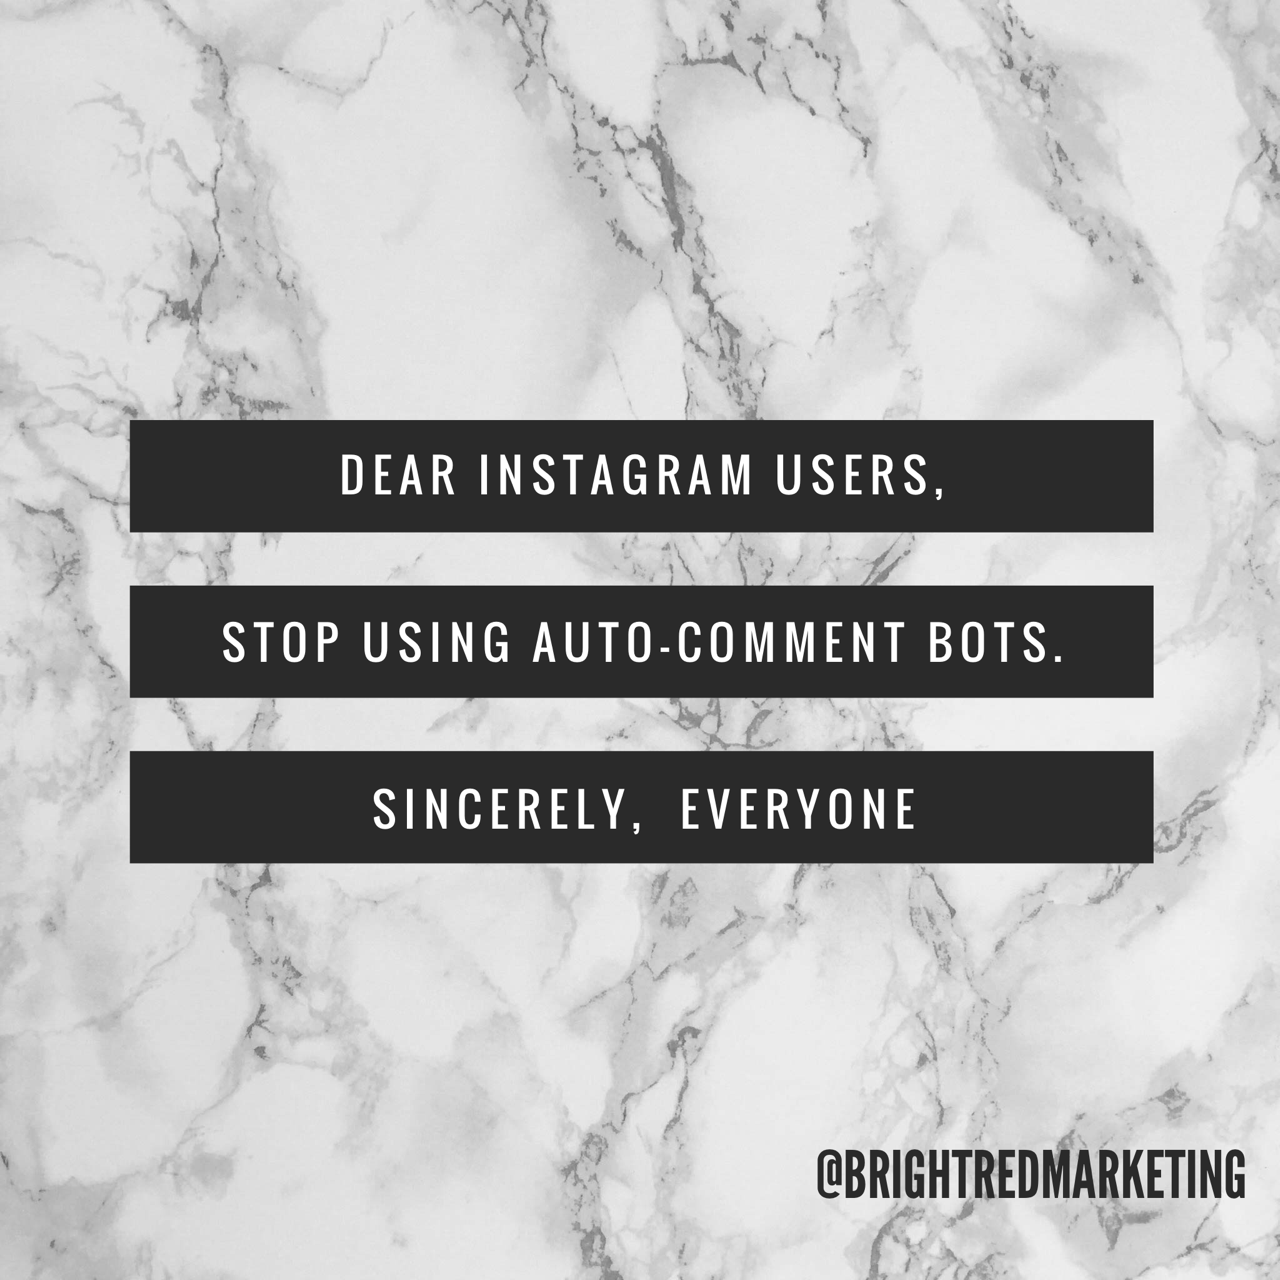 Dear Instagram Users, Stop Using Auto-Comments!